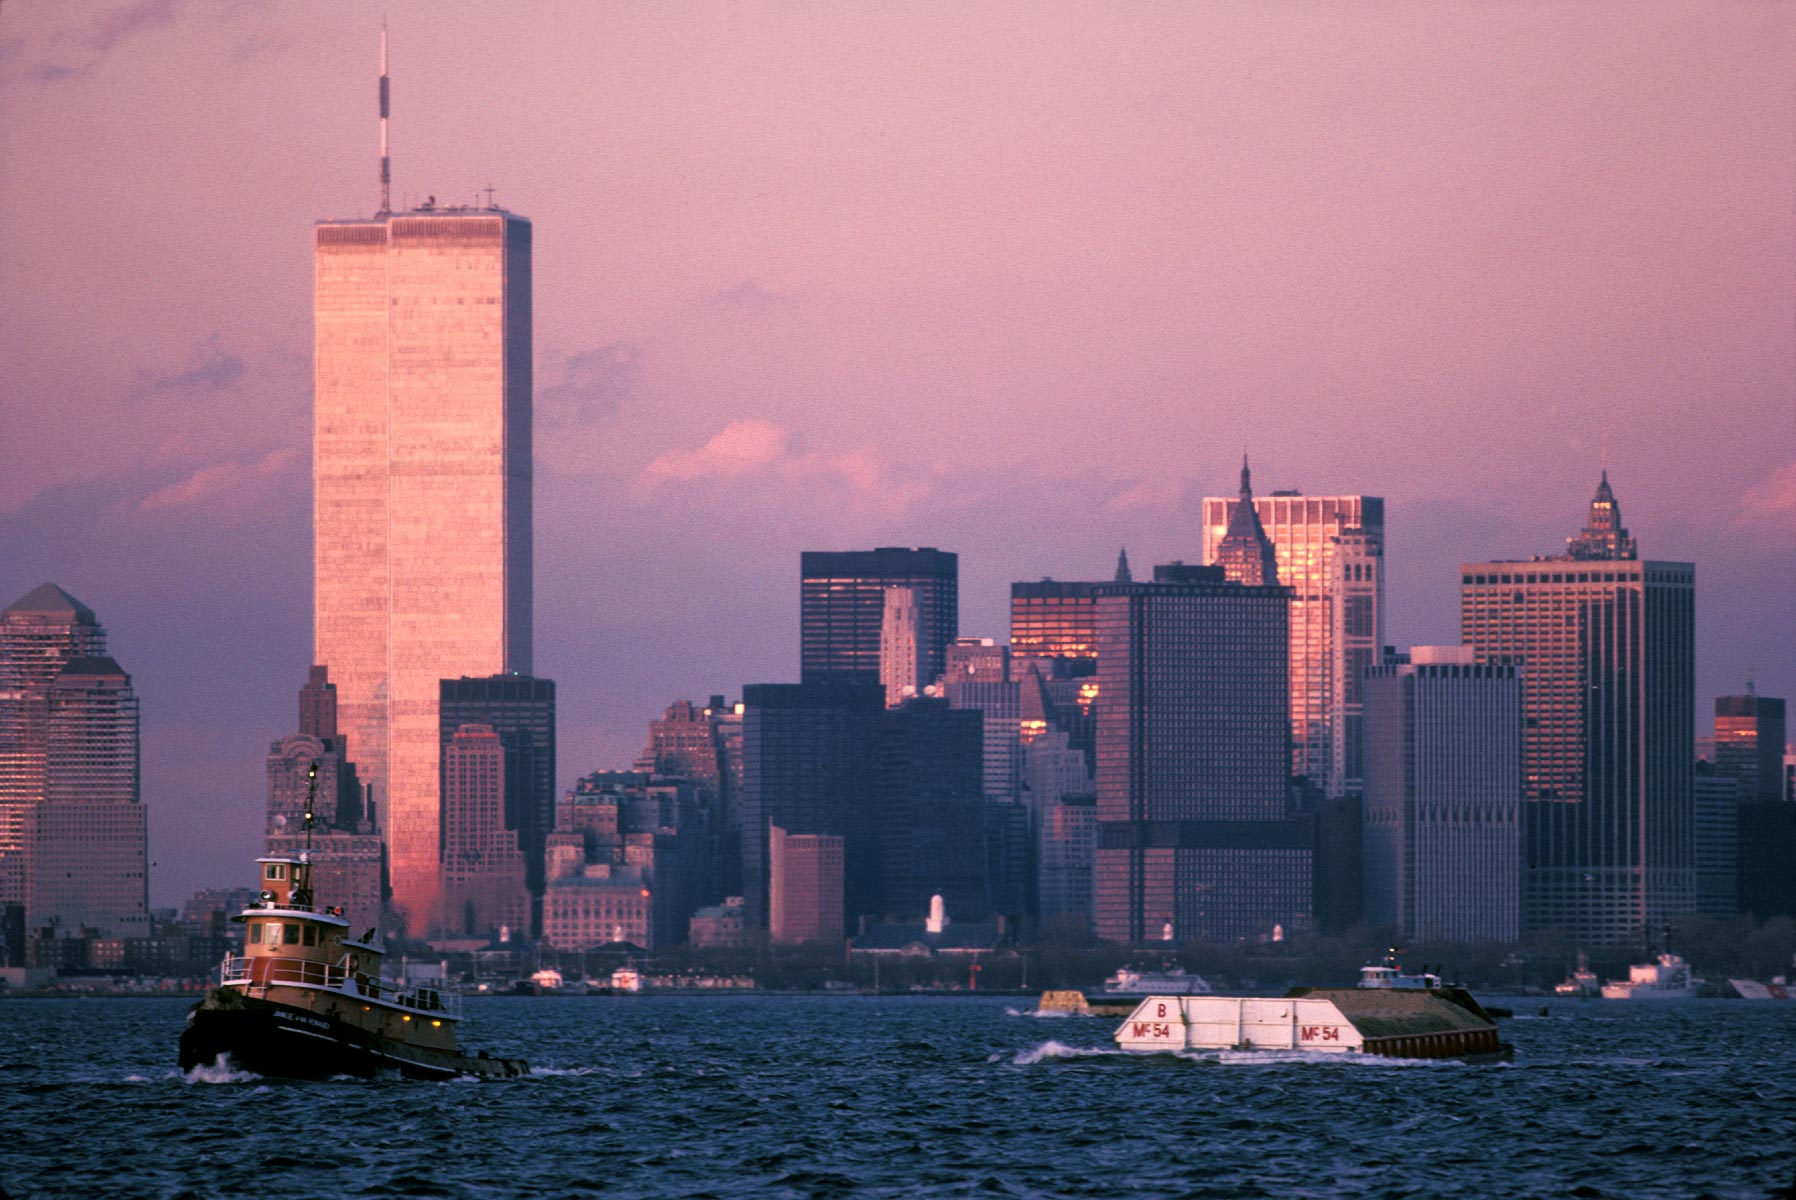 "Tug Pulling Barge"  <br>   World Trade Center in Background, NYC